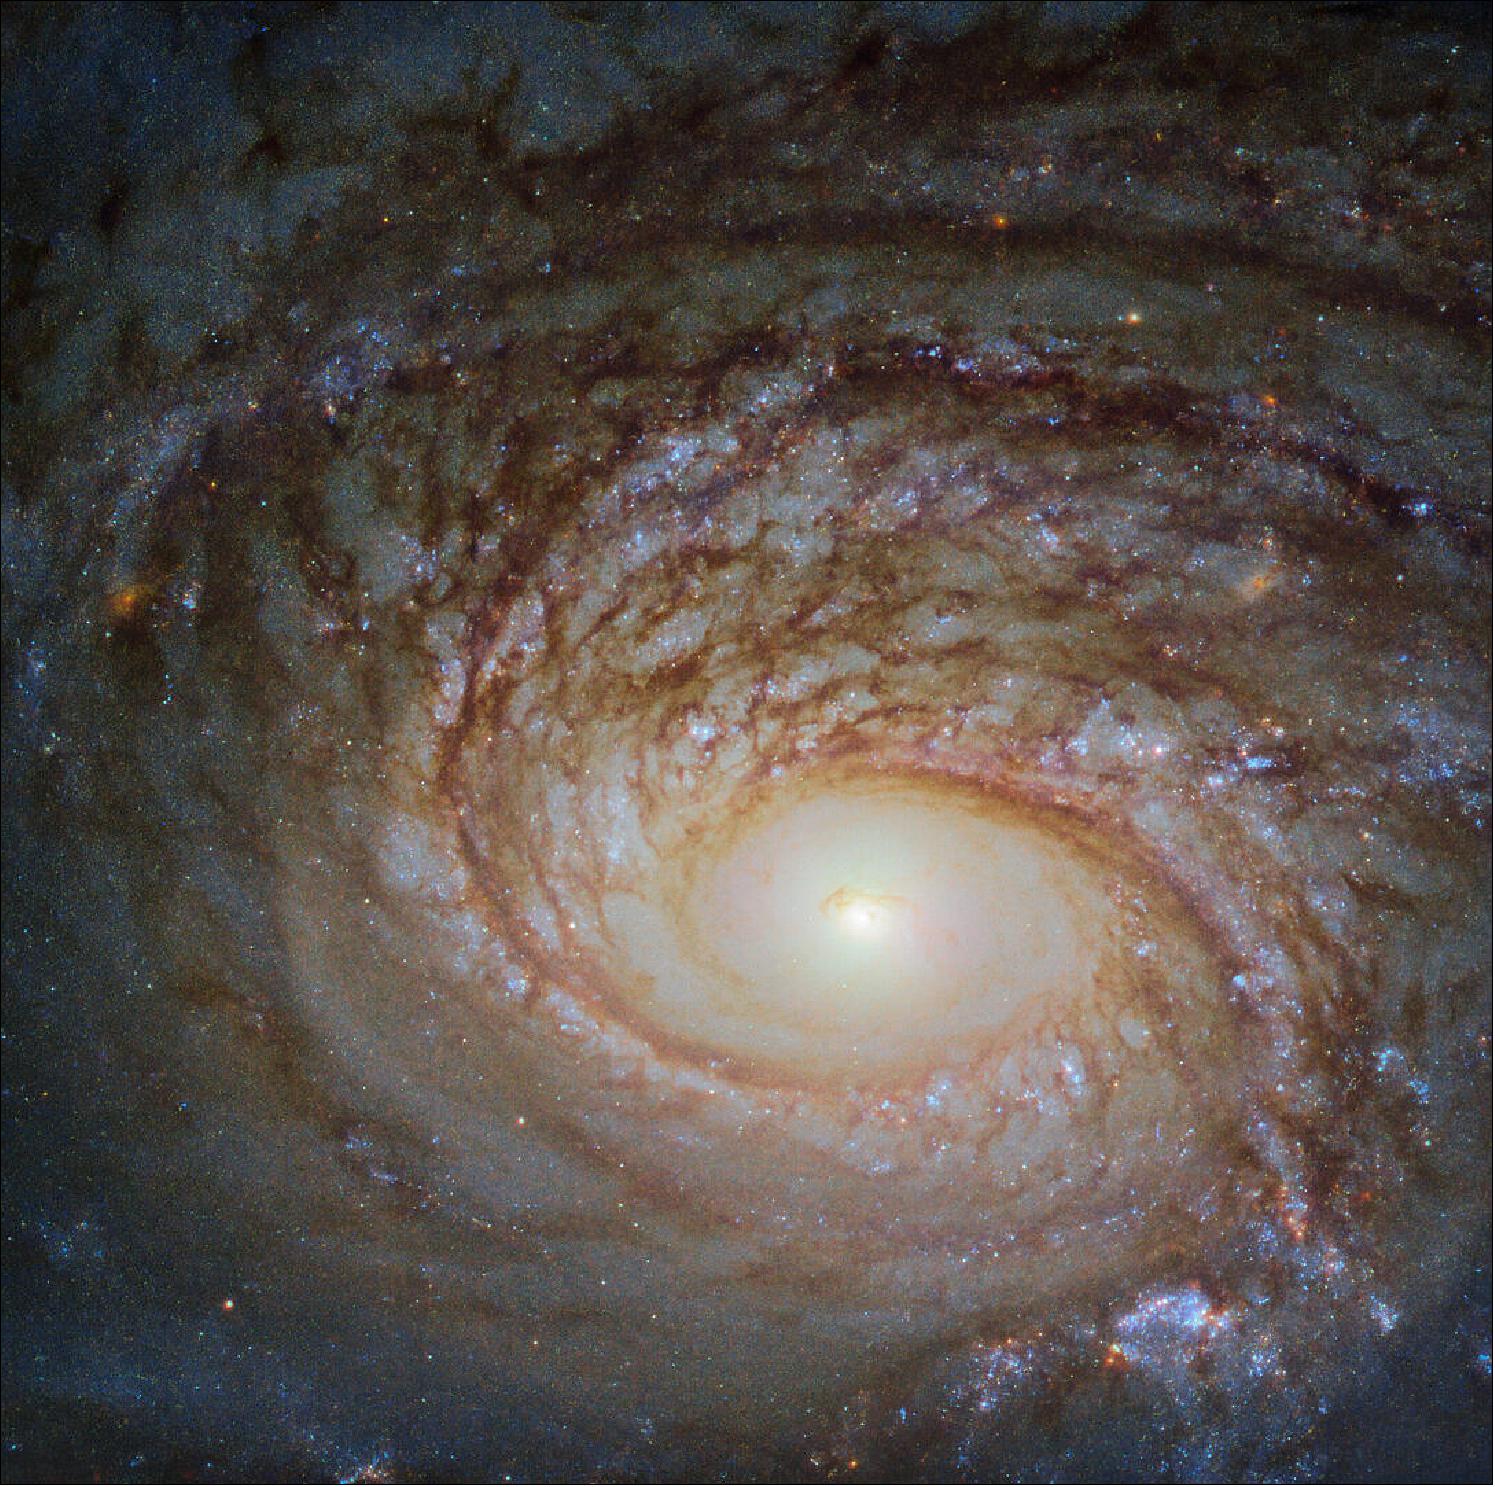 Figure 10: The galaxy NGC 772, is a local universe object at a distance of 100 million light years (image credit: ESA/Hubble & NASA, A. Seth et al., CC BY 4.0)